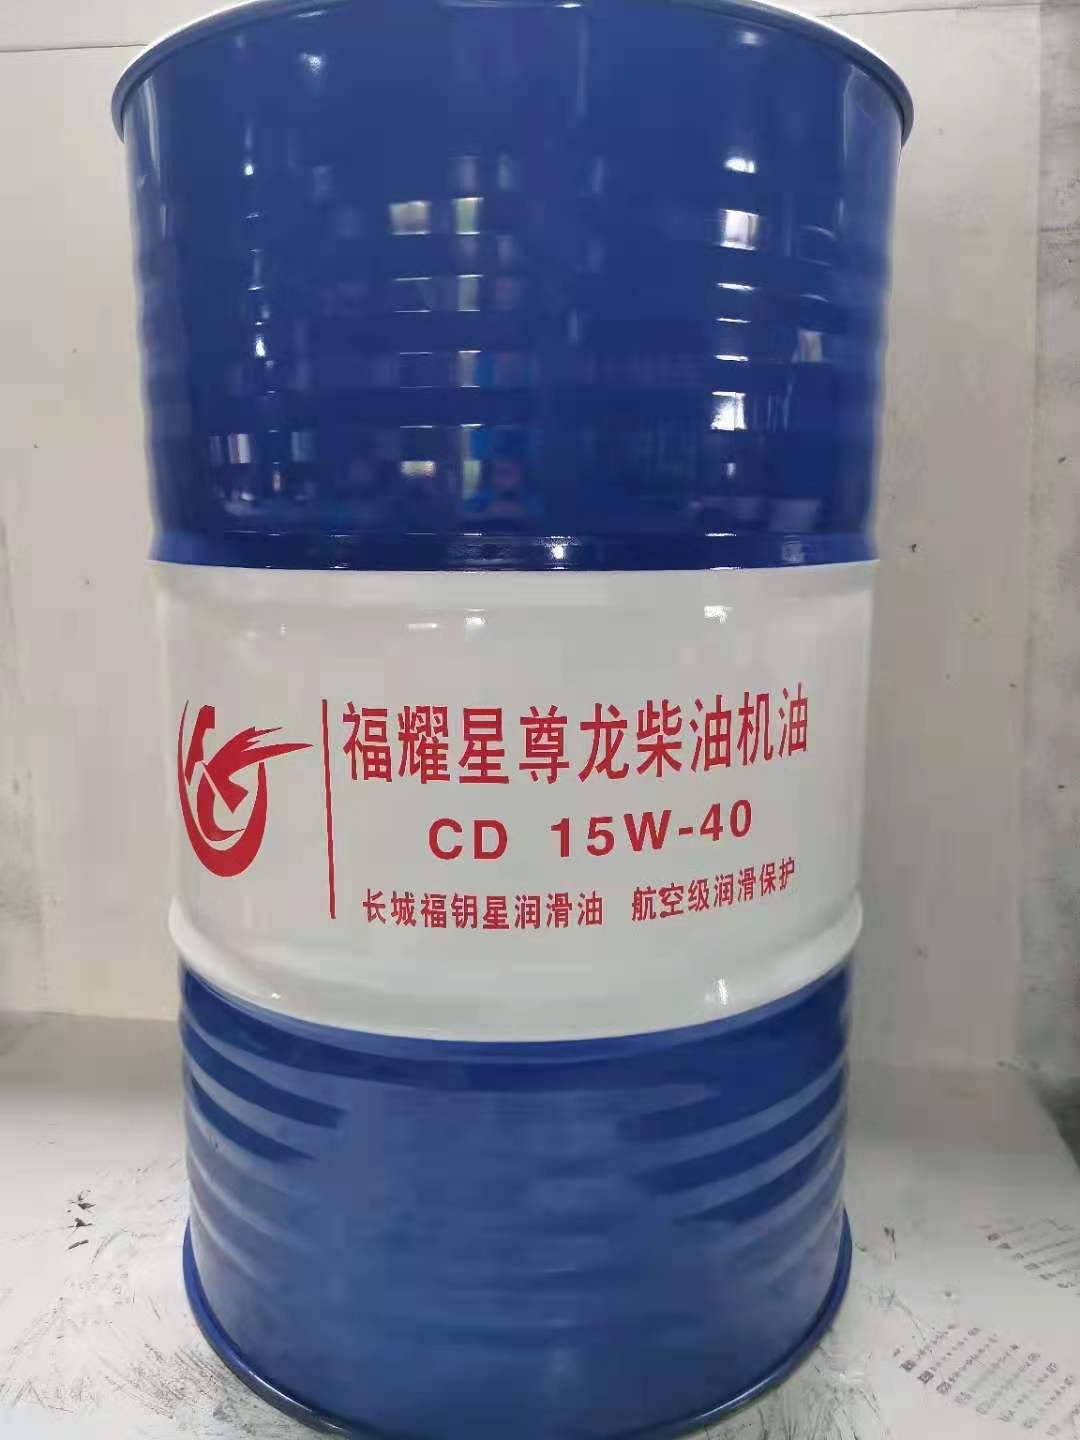 Baise quality goods the Great Wall Fuyao diesel oil engine oil 18 rise 15W-40 20W-50 Yuchai engine 170KG